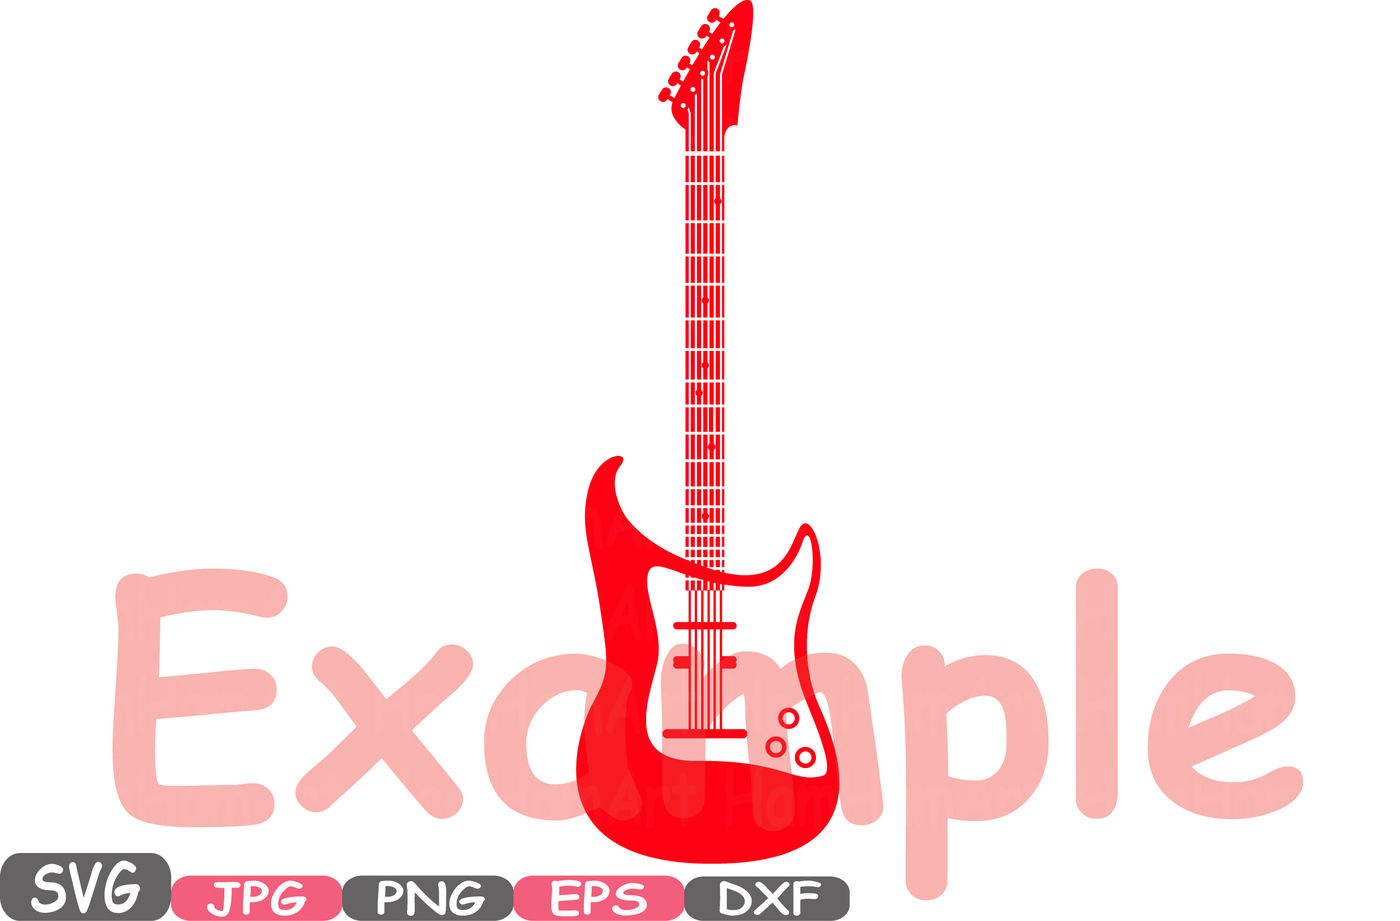 ori 65618 bd41ba37ecf19822d96aefe91781c6638c9accfa school of rock cutting files svg clipart silhouette welcome long live rock and roll heavy metal vinyl eps png music vector 659s